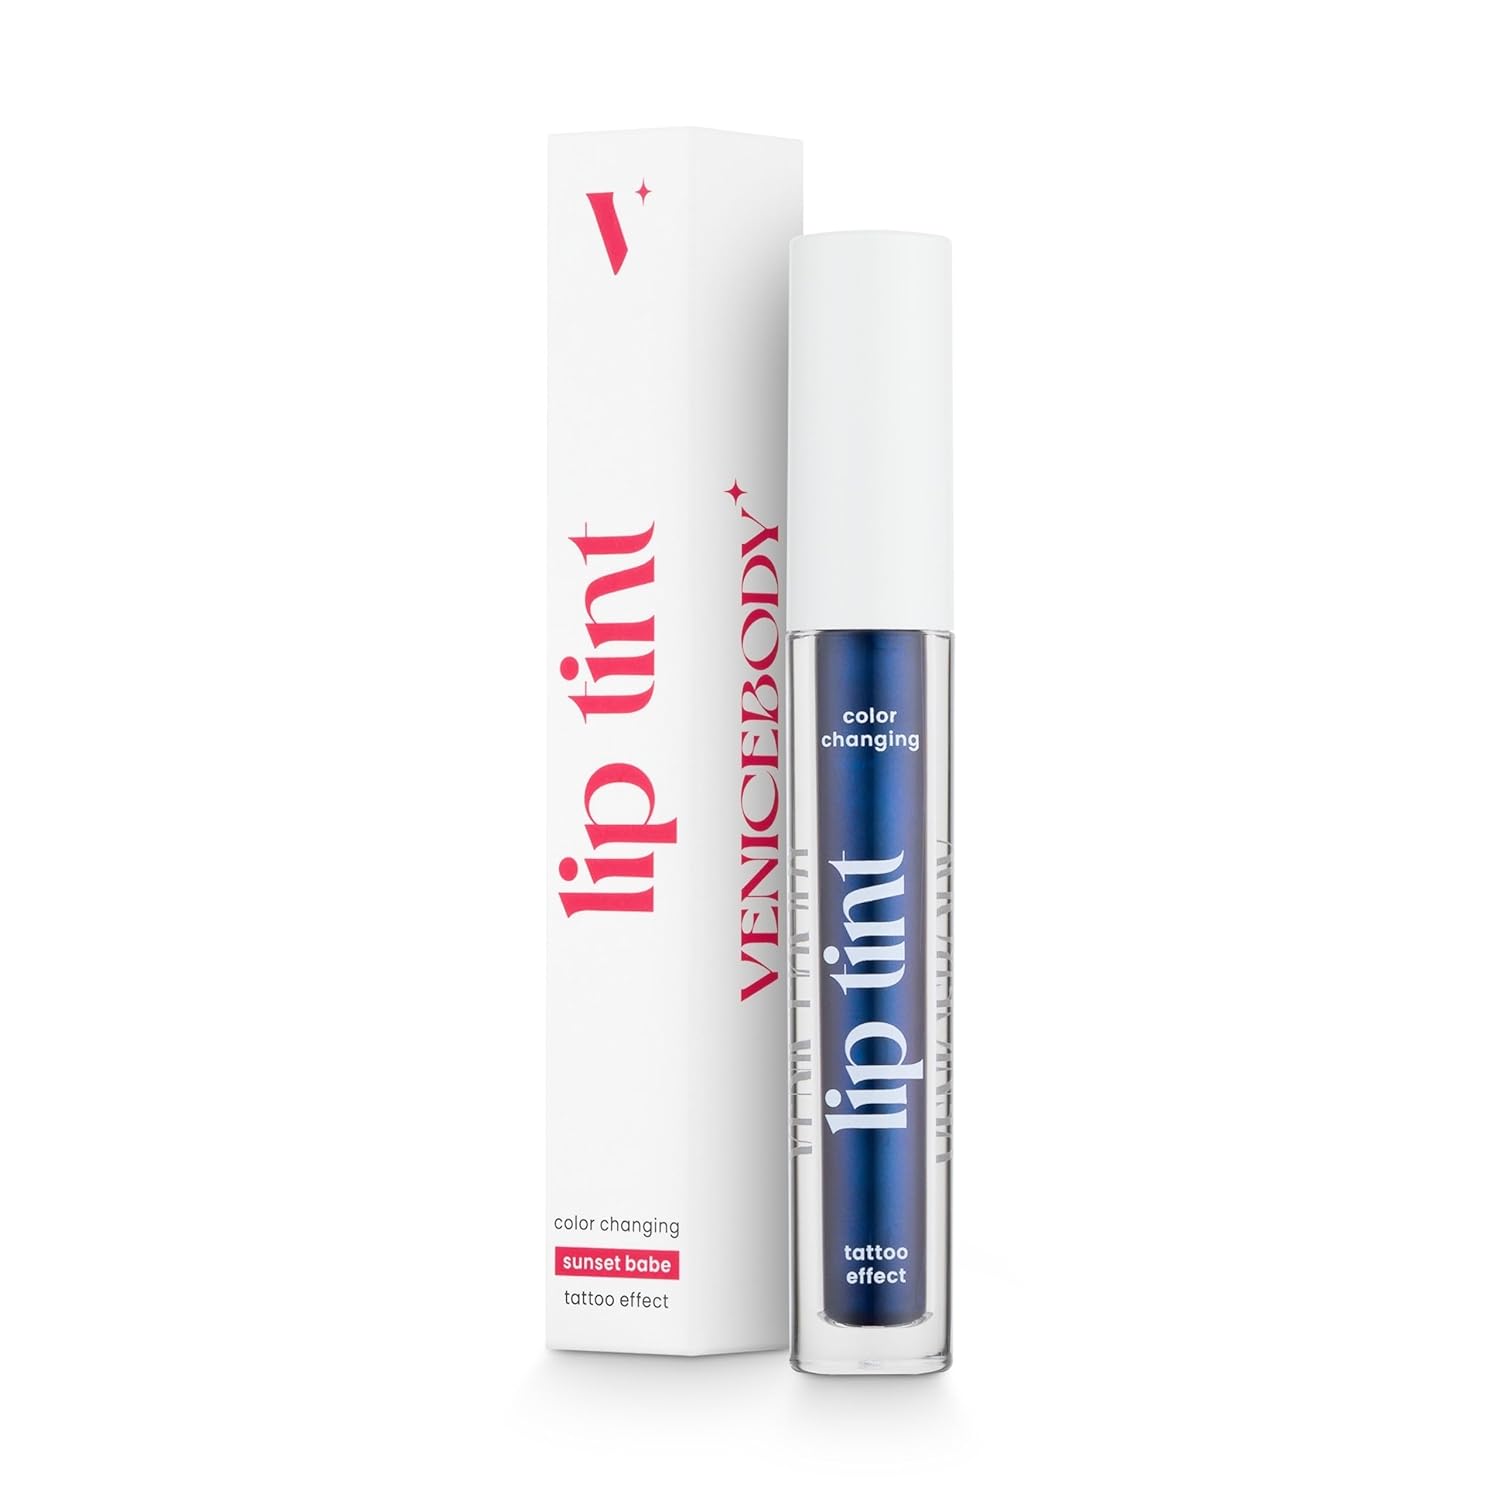 Venicebody Color -Changing Lip Tint Tattoo Effect - Replaces Lipstick, Lasts All Day Without Smudging (Sunset Babe)